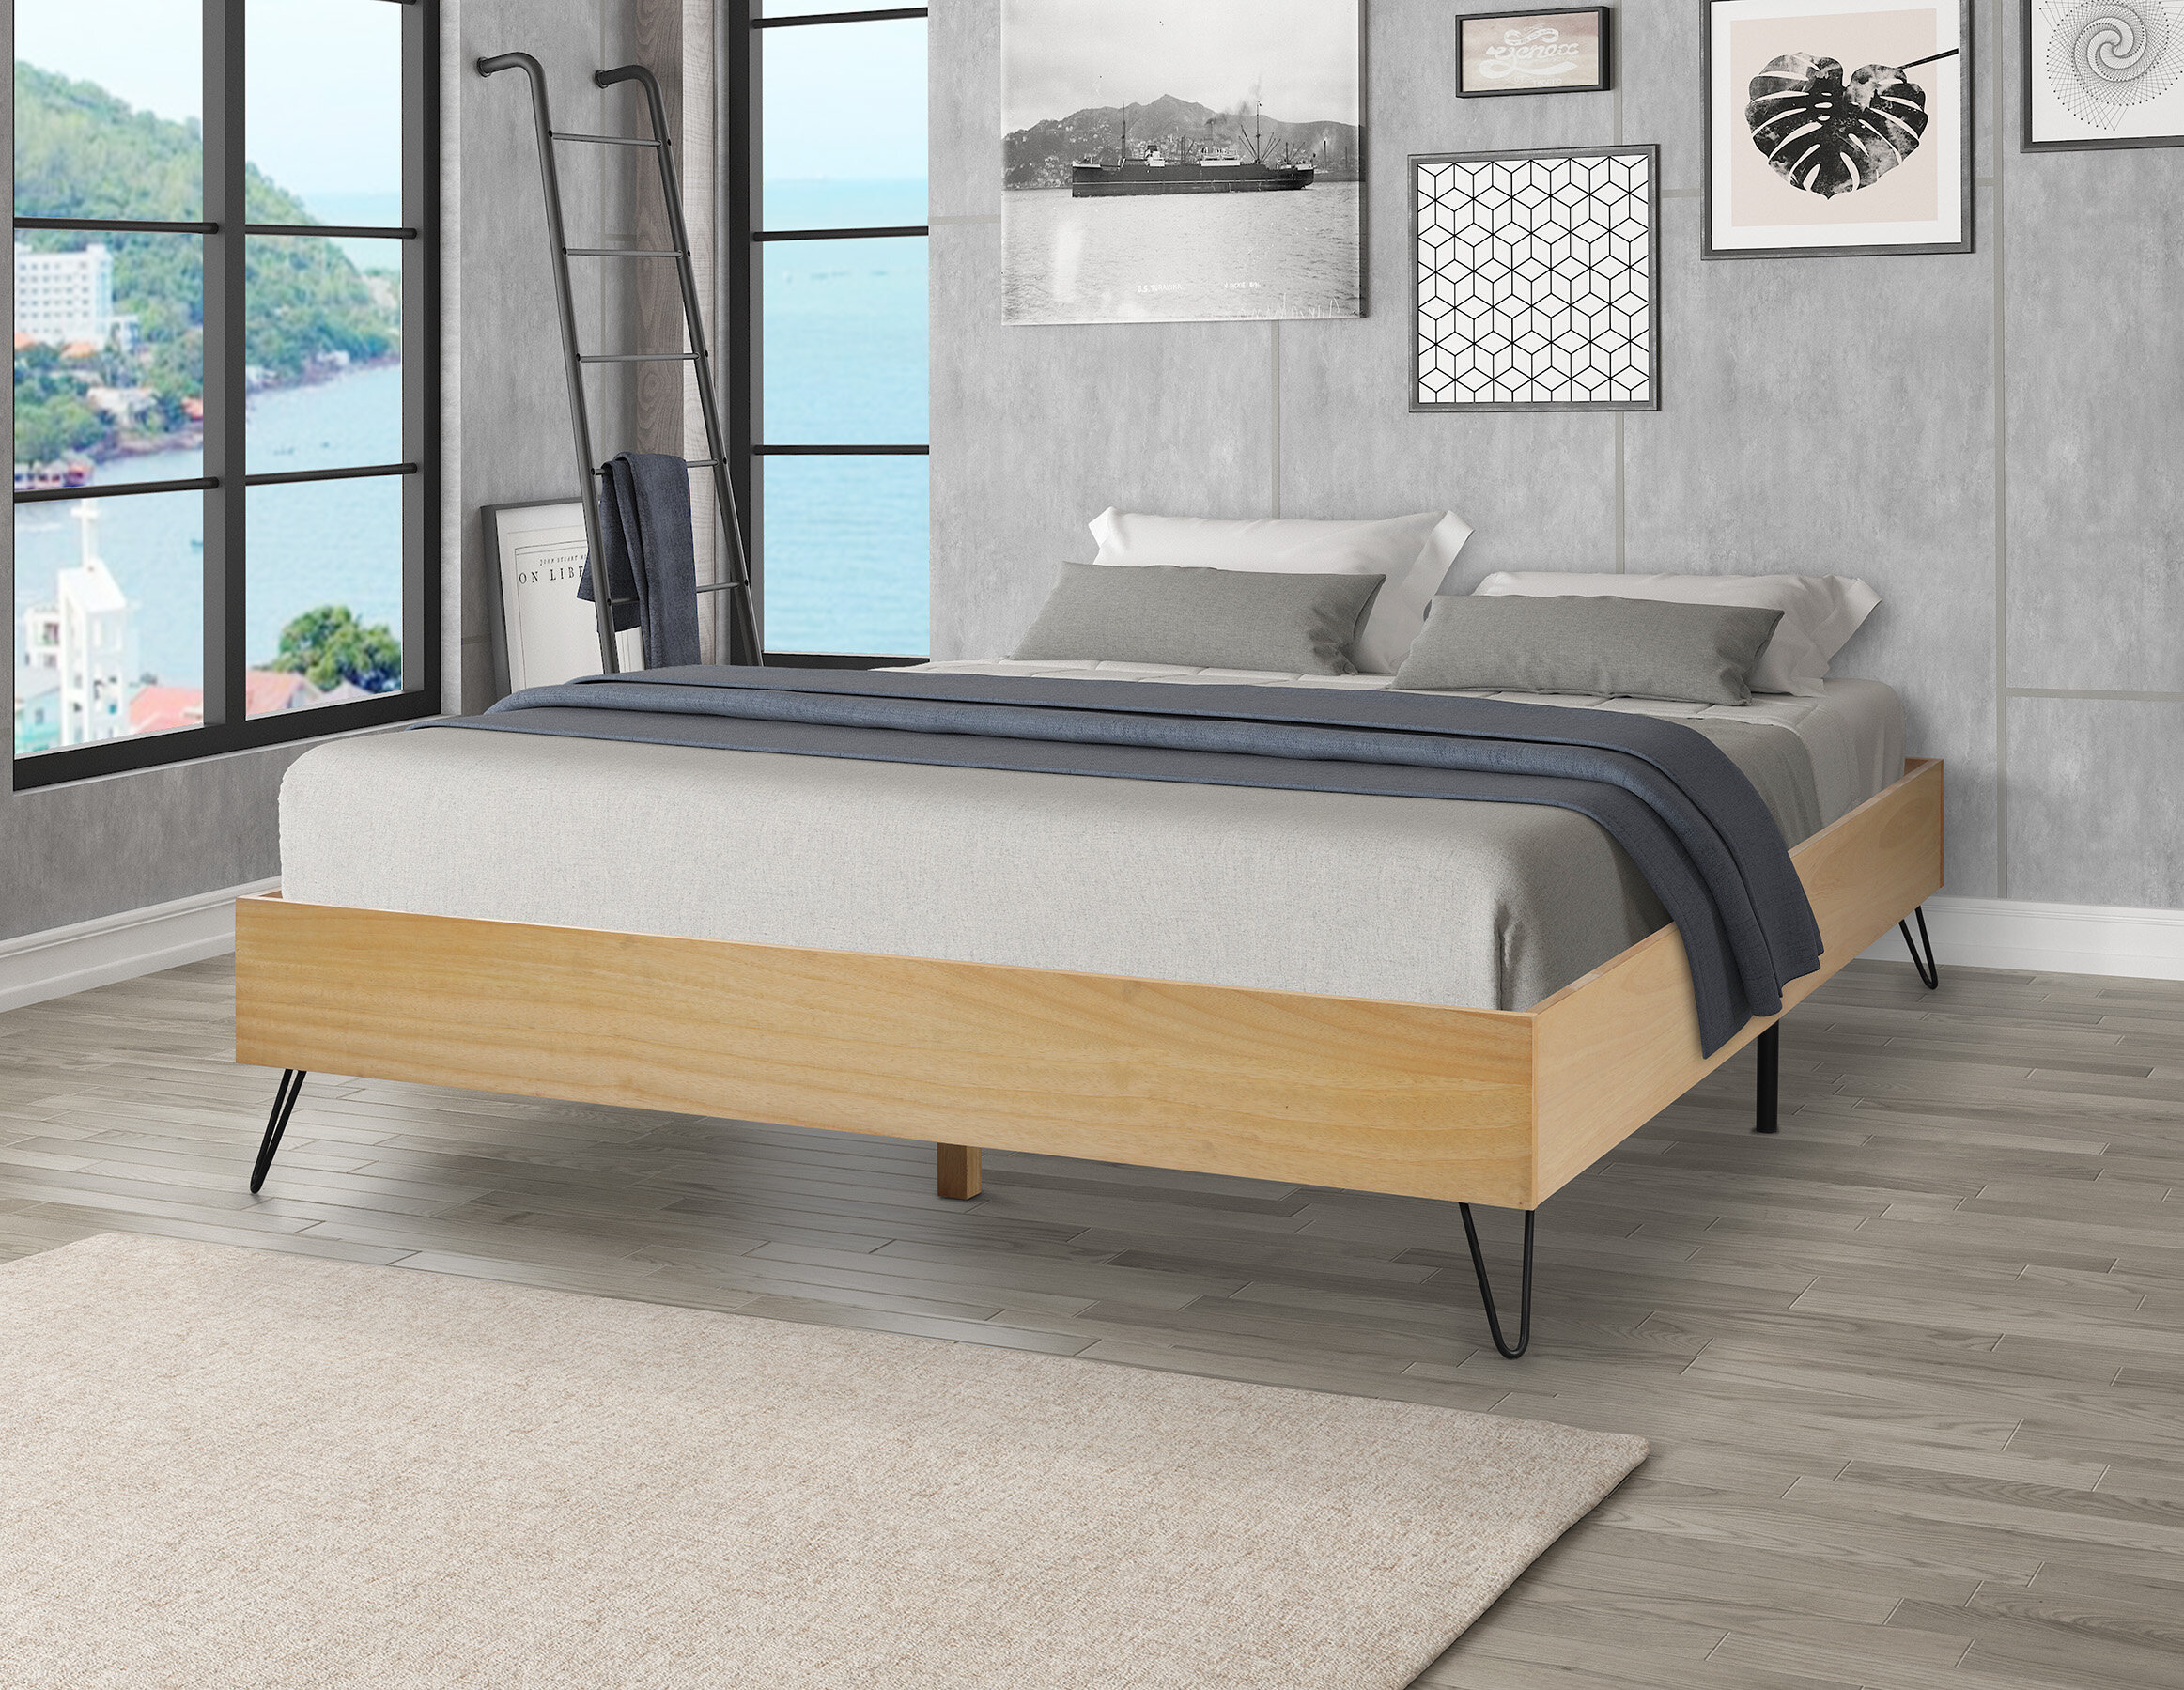 Featured image of post Scandinavian Light Wood Bed Frame / Check out our scandinavian bed selection for the very best in unique or custom, handmade pieces from our shops.